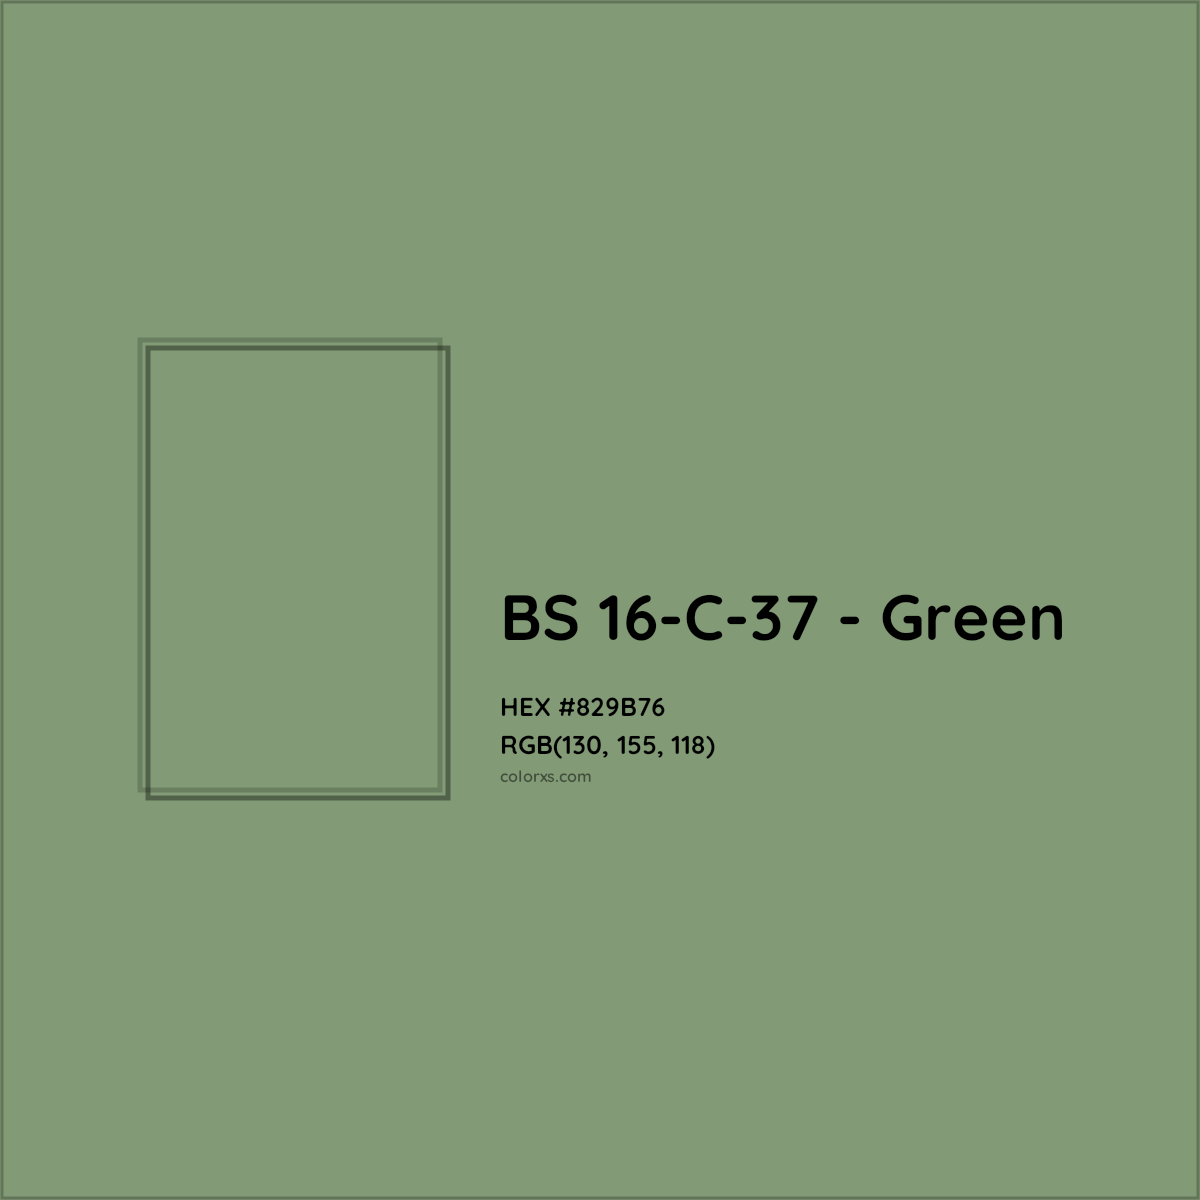 HEX #829B76 BS 16-C-37 - Green CMS British Standard 4800 - Color Code